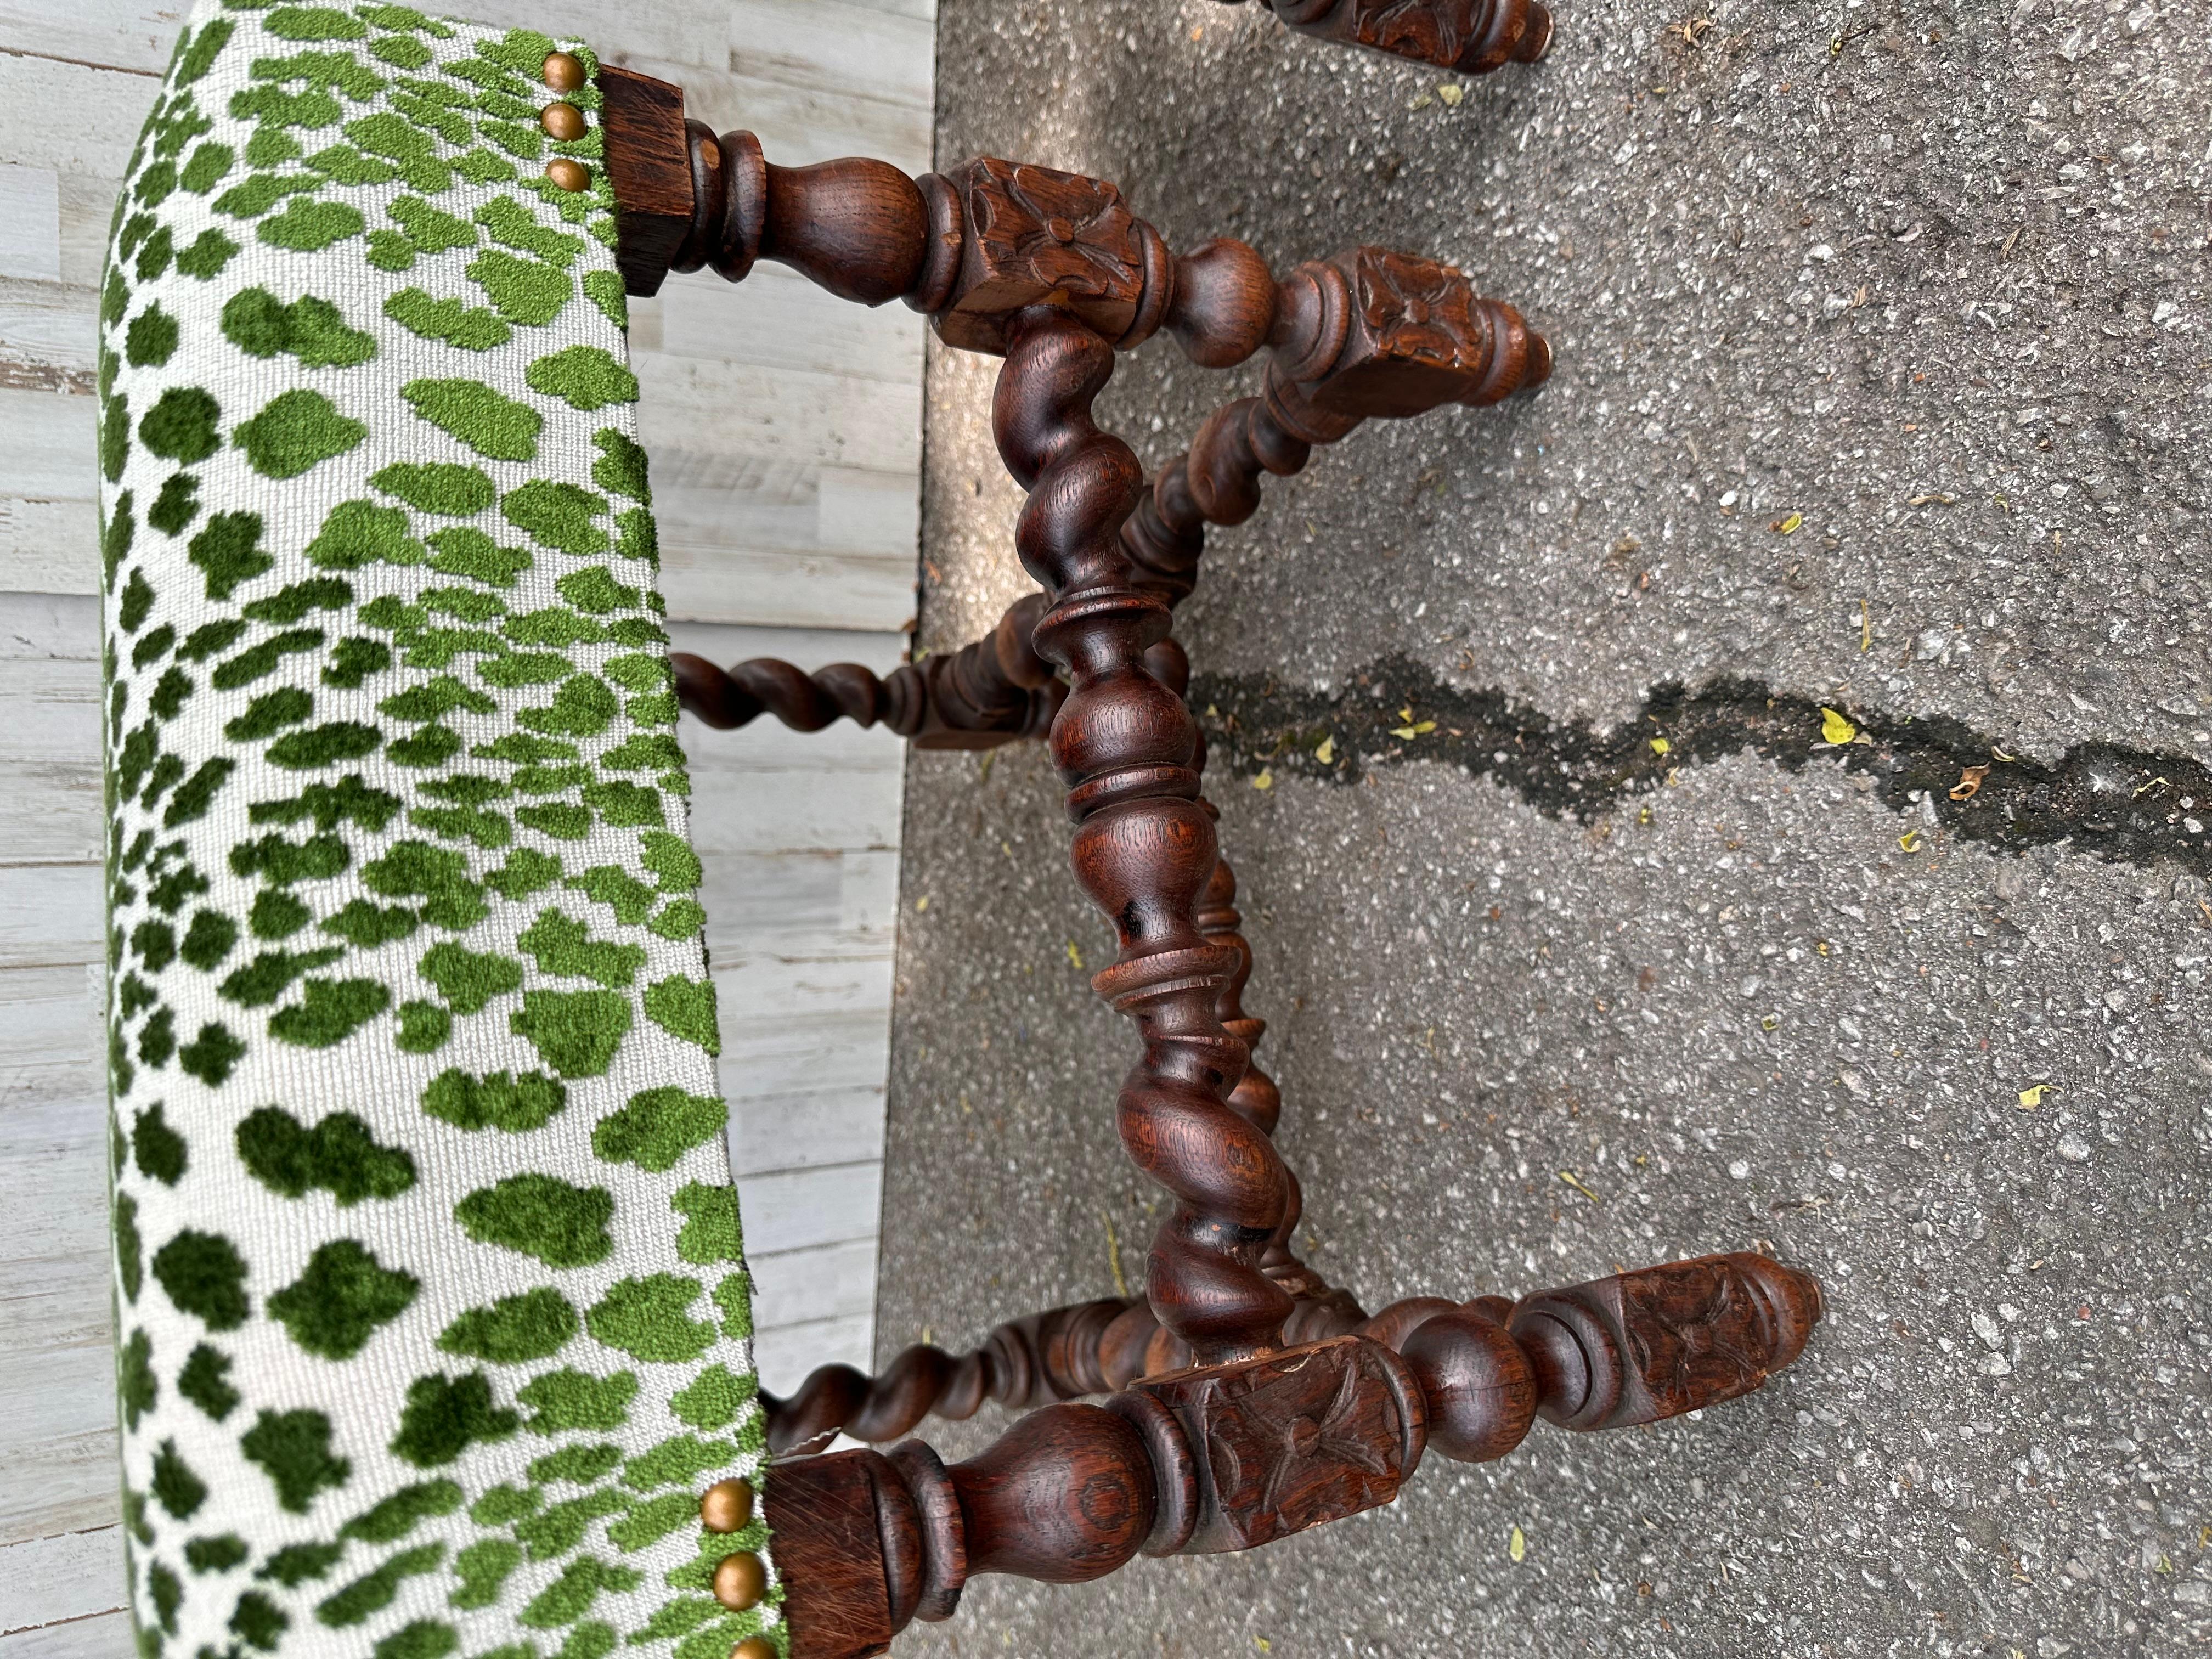 Beautiful antique newly upholstered set of benches! The fabric is a stunning green, crushed velvet material. The base is solid, hand carved wood, rich brown color that pairs wonderfully with the green fabric and brass nail heads. These would look